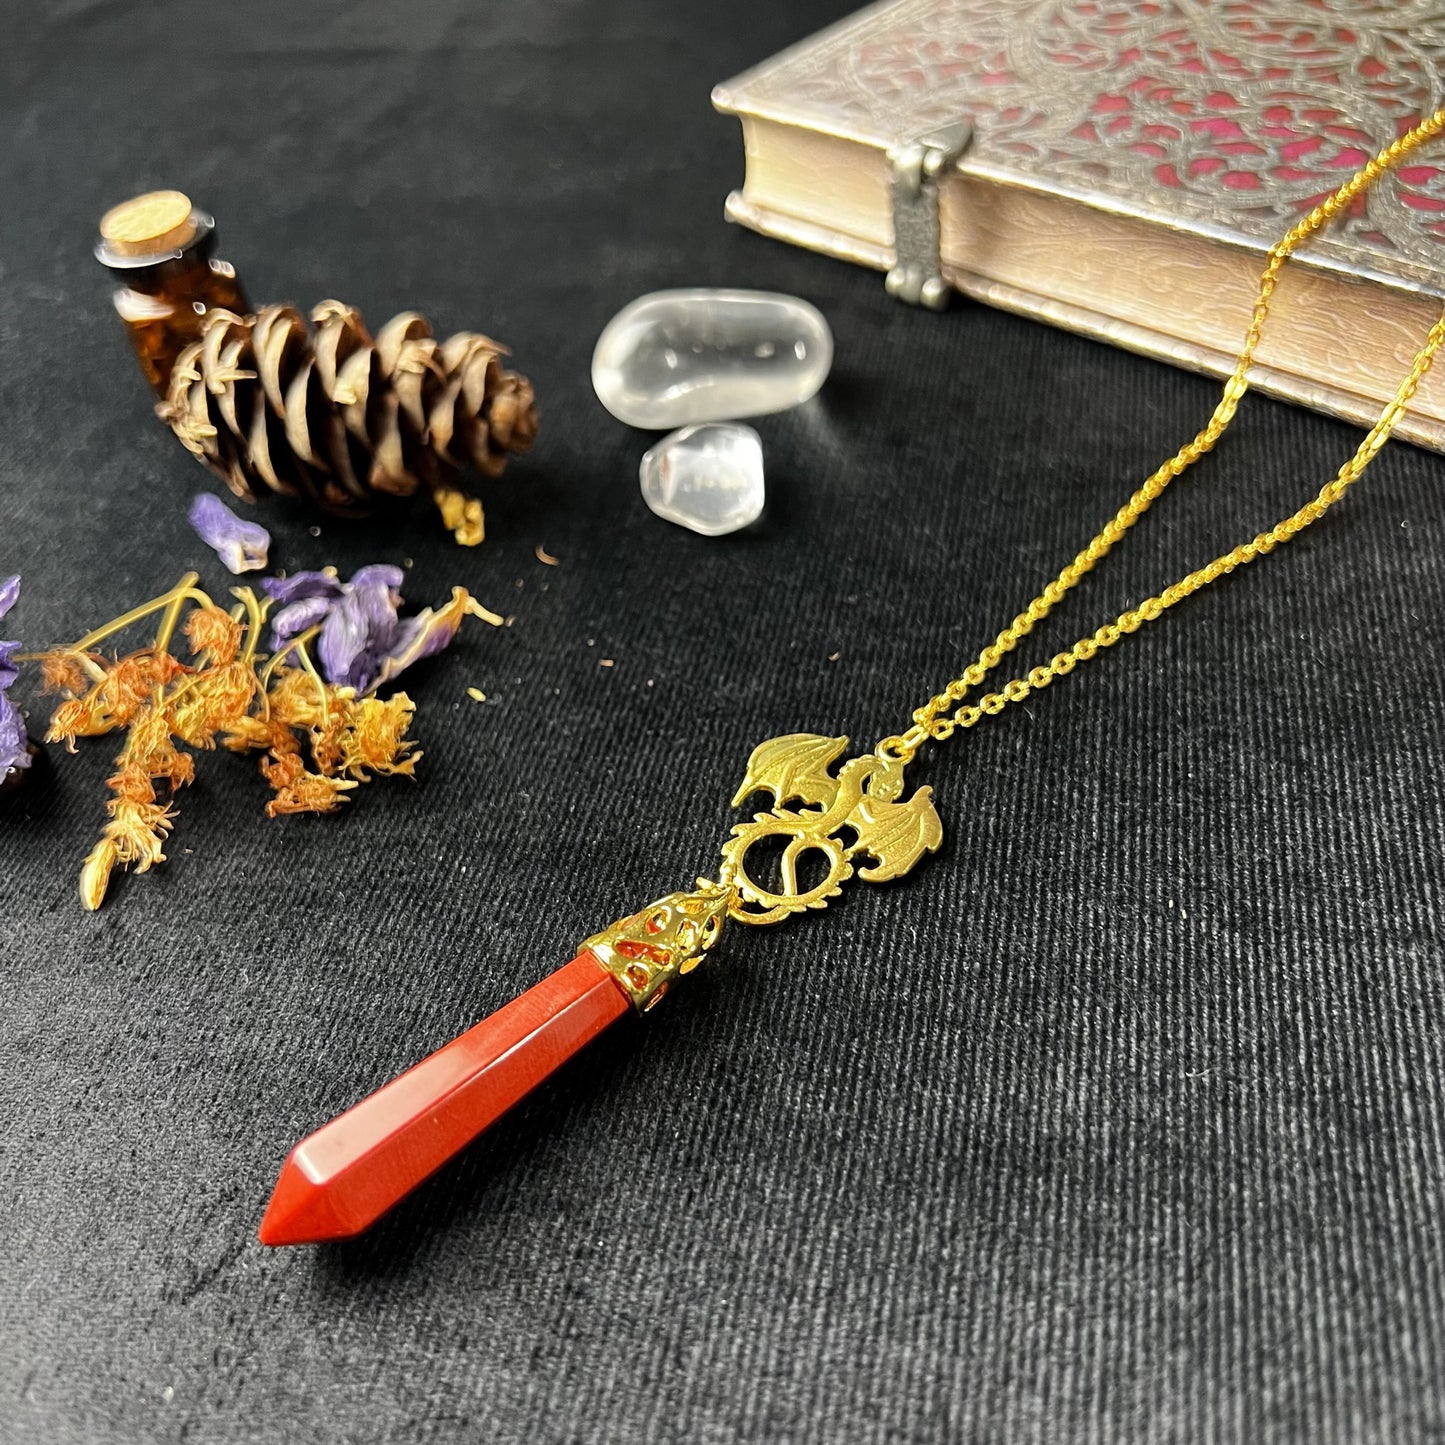 Golden red jasper and dragon divination pendulum necklace - The French Witch shop